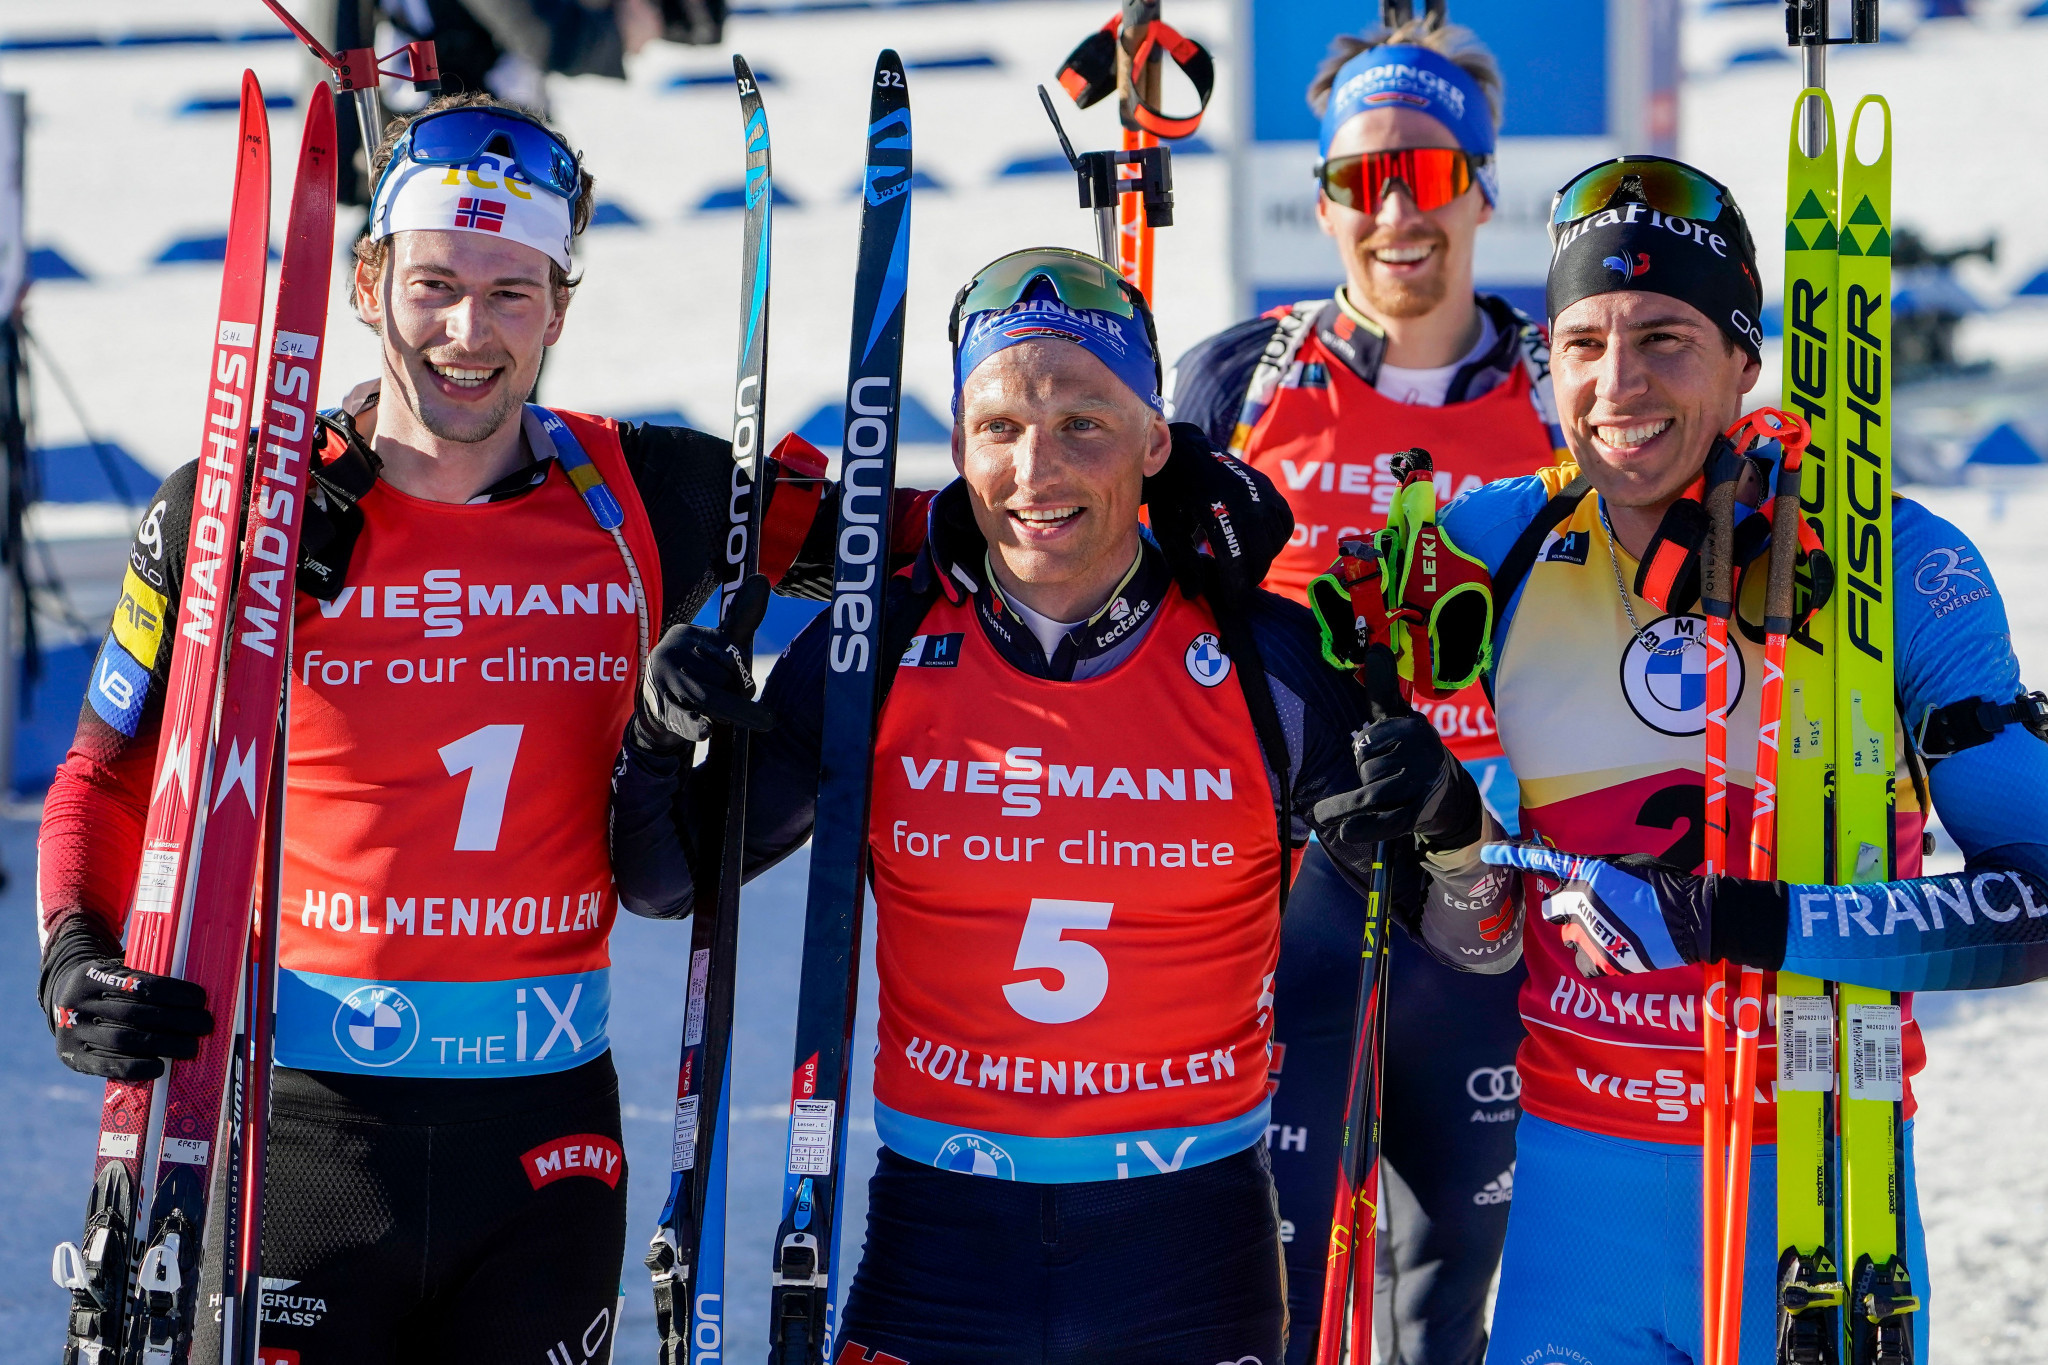 Sturla Holm Laegreid of Norway, Erik Lesser of Germany and Quentin Fillon Maillet of France secure their places on the podium in the men's 12.5km pursuit event at the IBU World Cup in Holmenkollen ©Getty Images